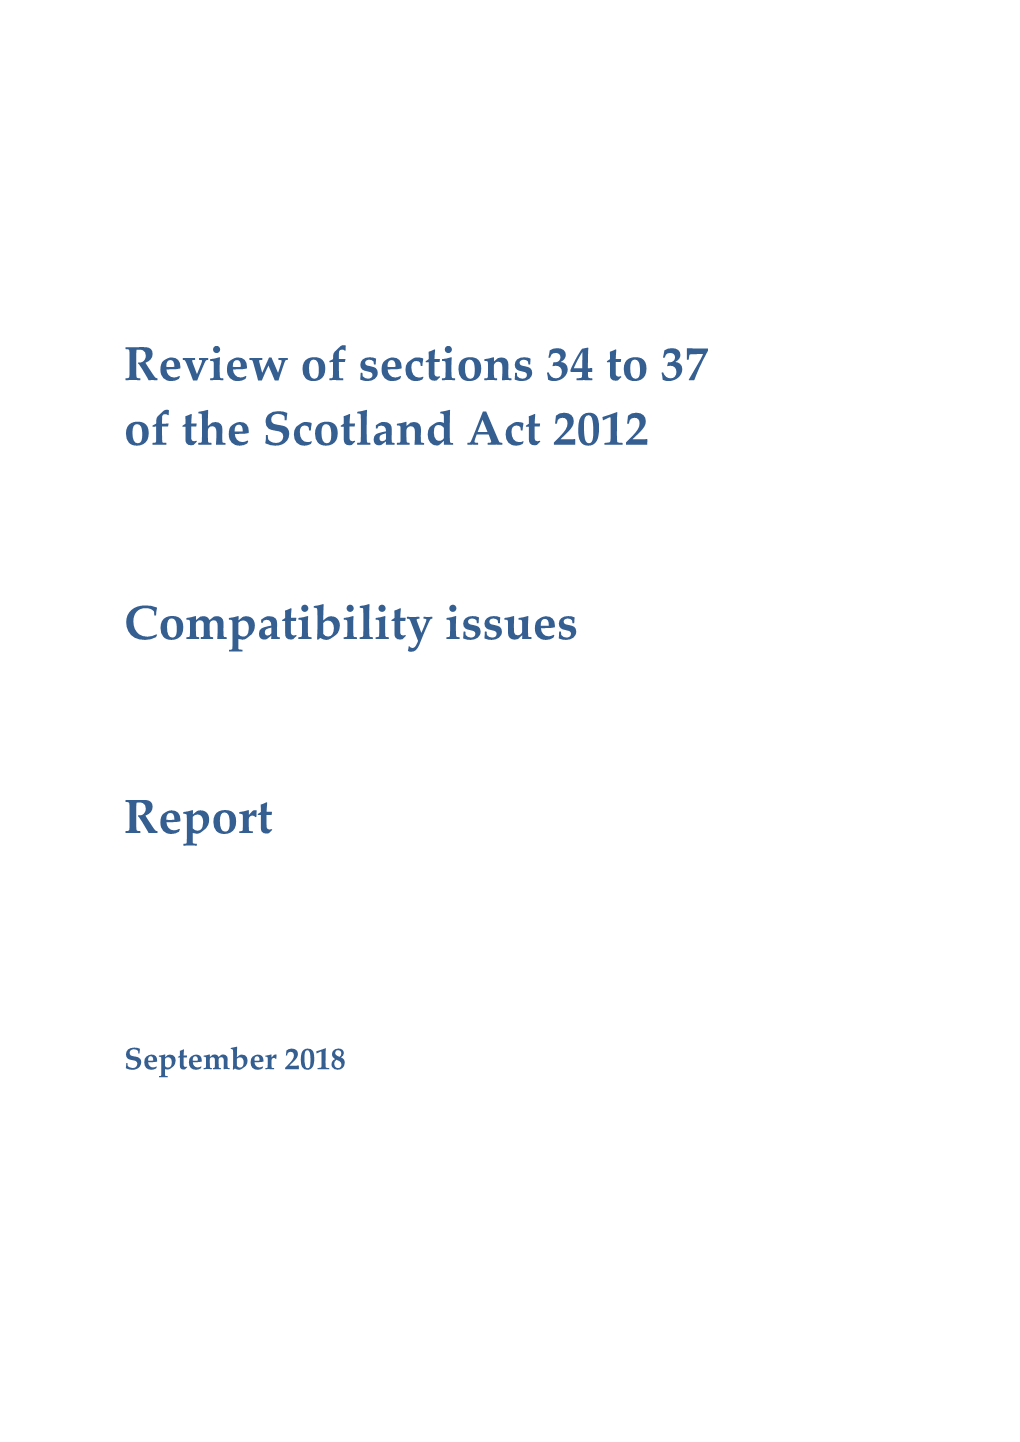 Review of Sections 34 to 37 of the Scotland Act 2012 Compatibility